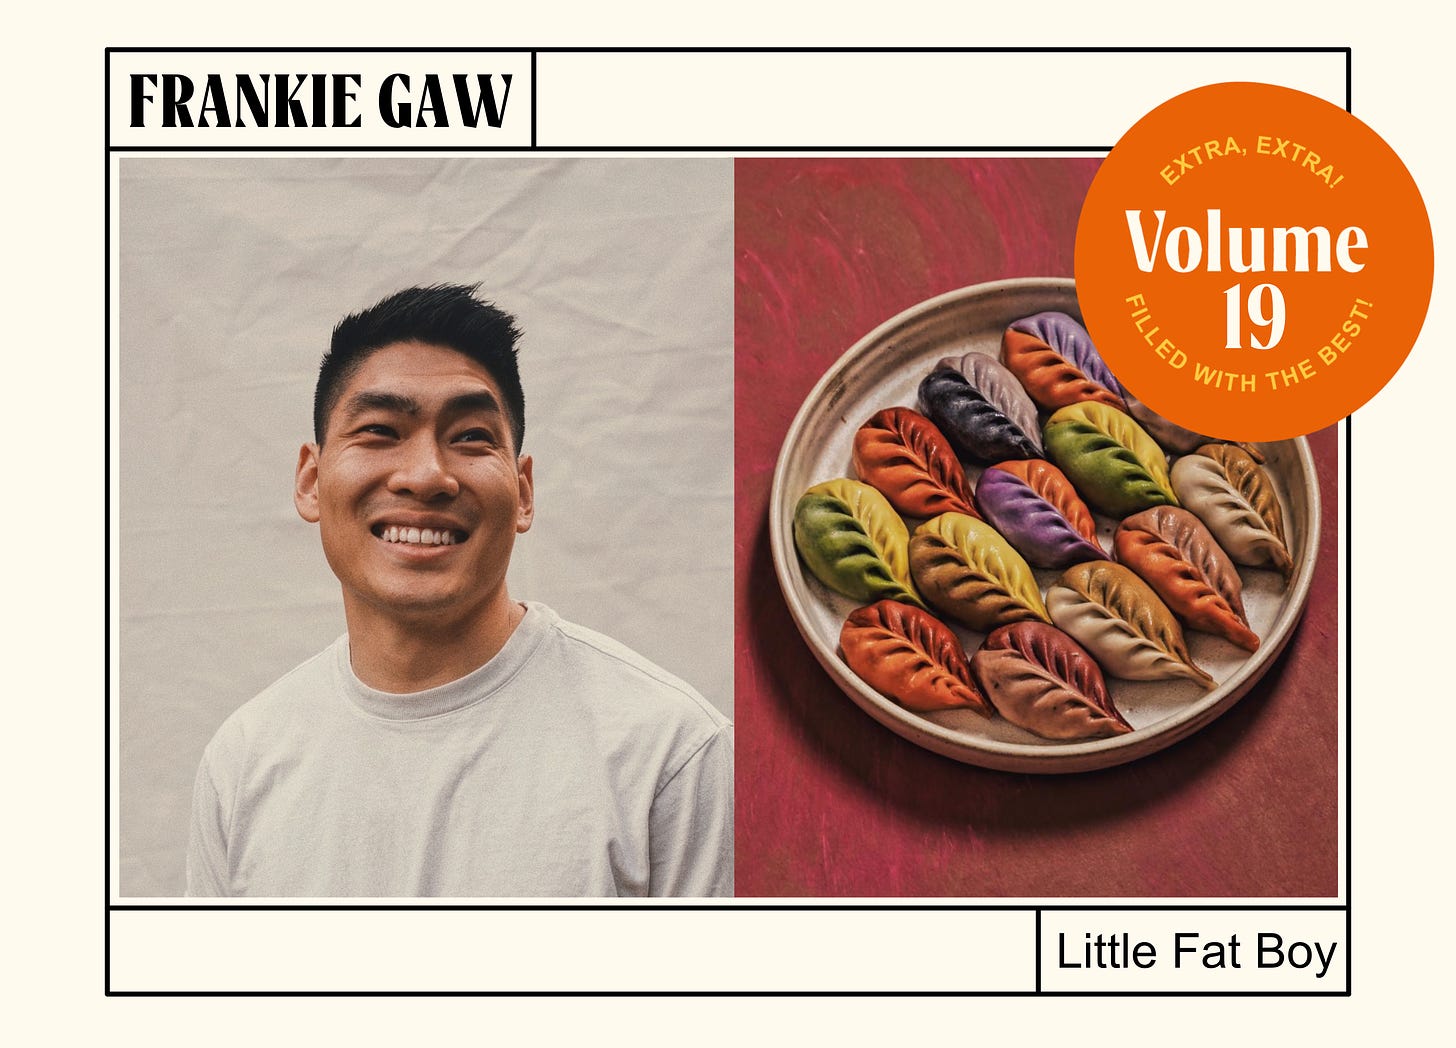 Frankie Gaw next to a photo of two-toned dumplings